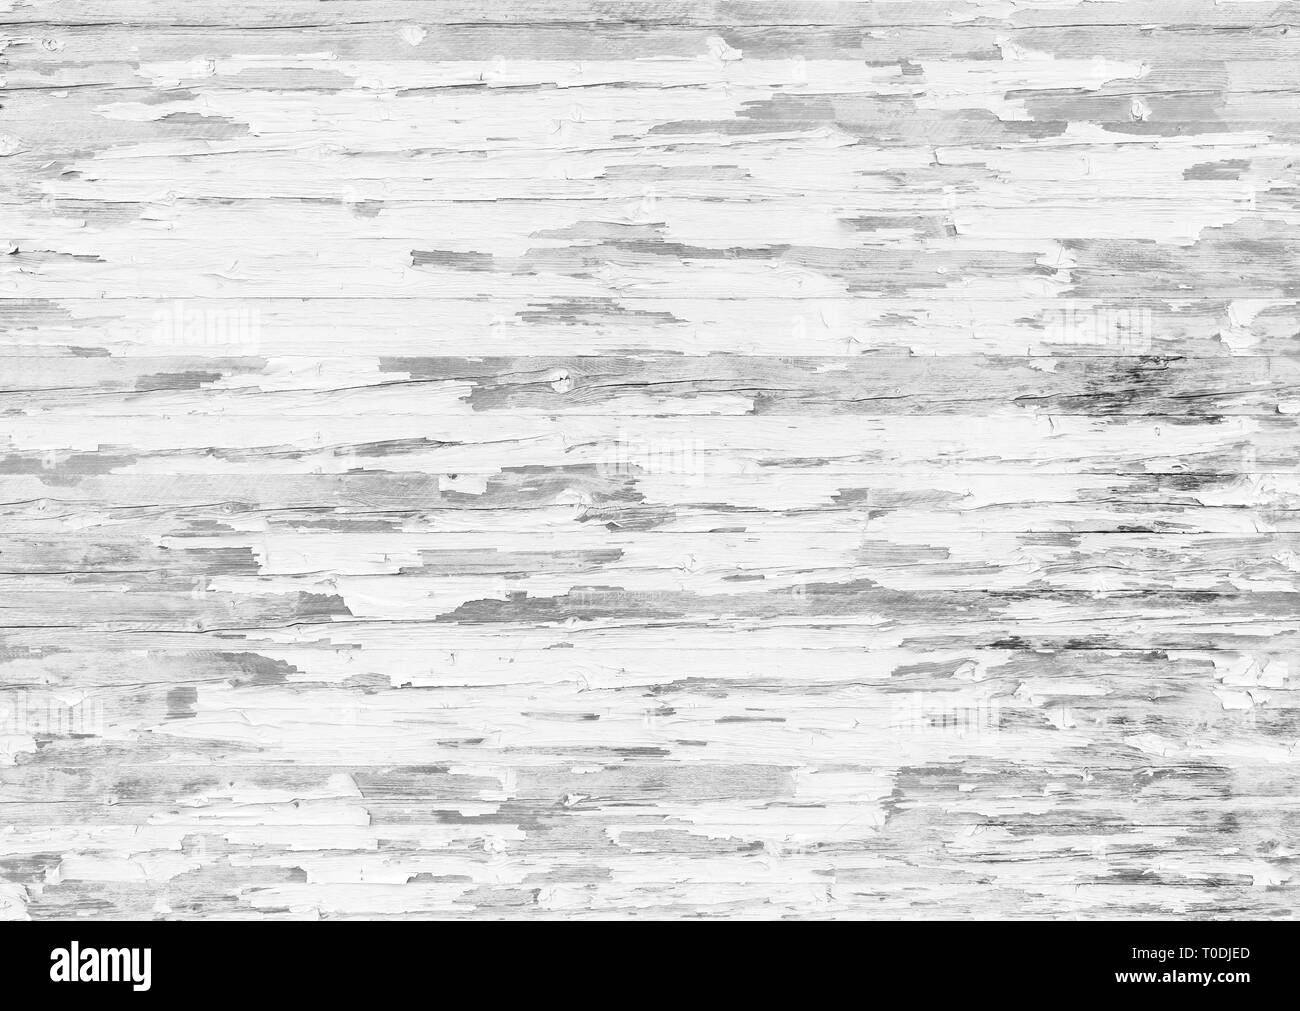 High resolution full frame background of a weathered and faded wooden wall or wood panelling in black and white, paint mostly peeled off. Stock Photo